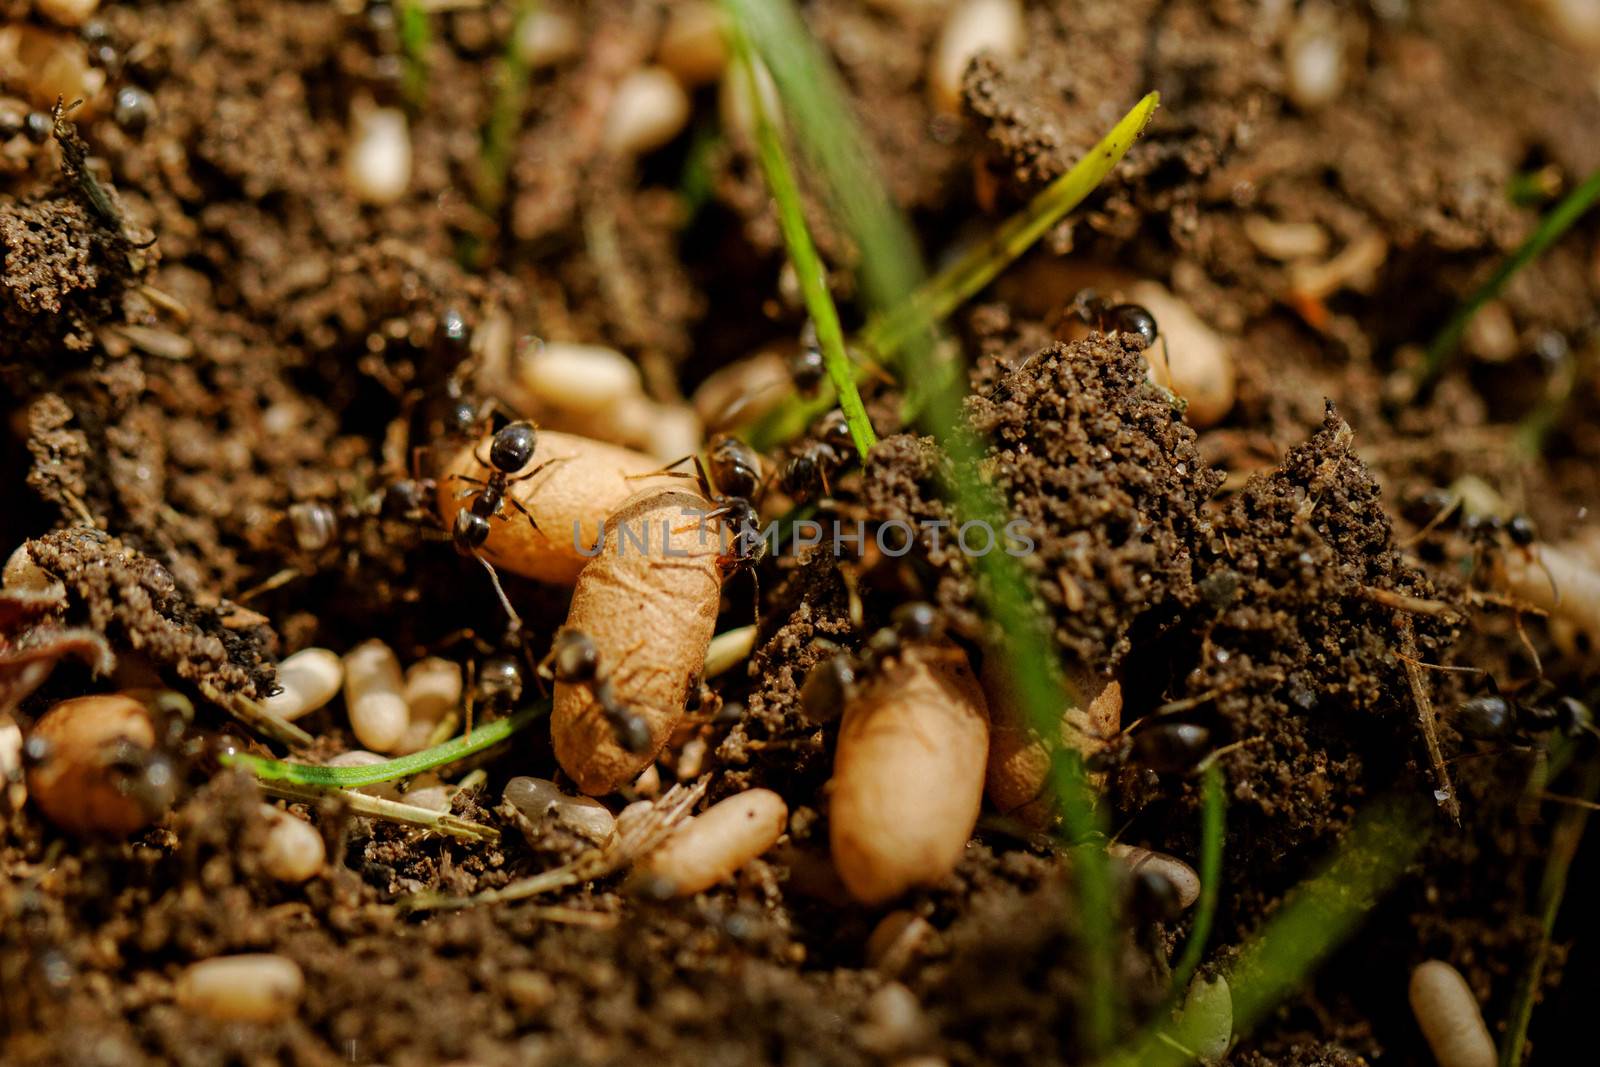 in the anthill moving ants the eggs